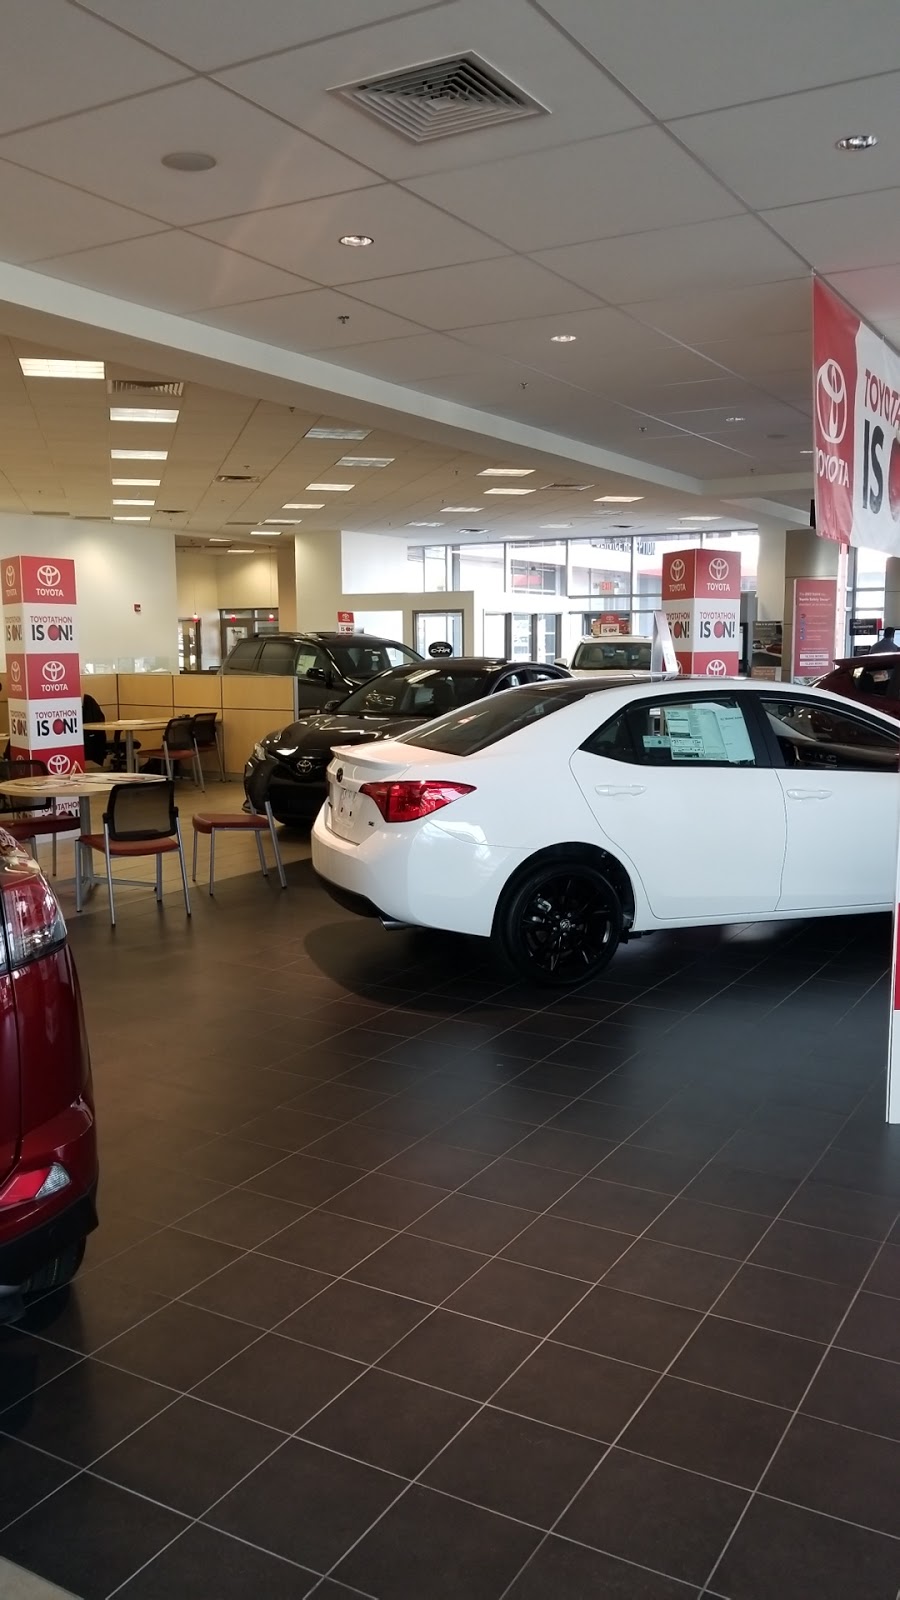 Tri County Toyota | 15 D and L Dr, Royersford, PA 19468 | Phone: (610) 495-4588